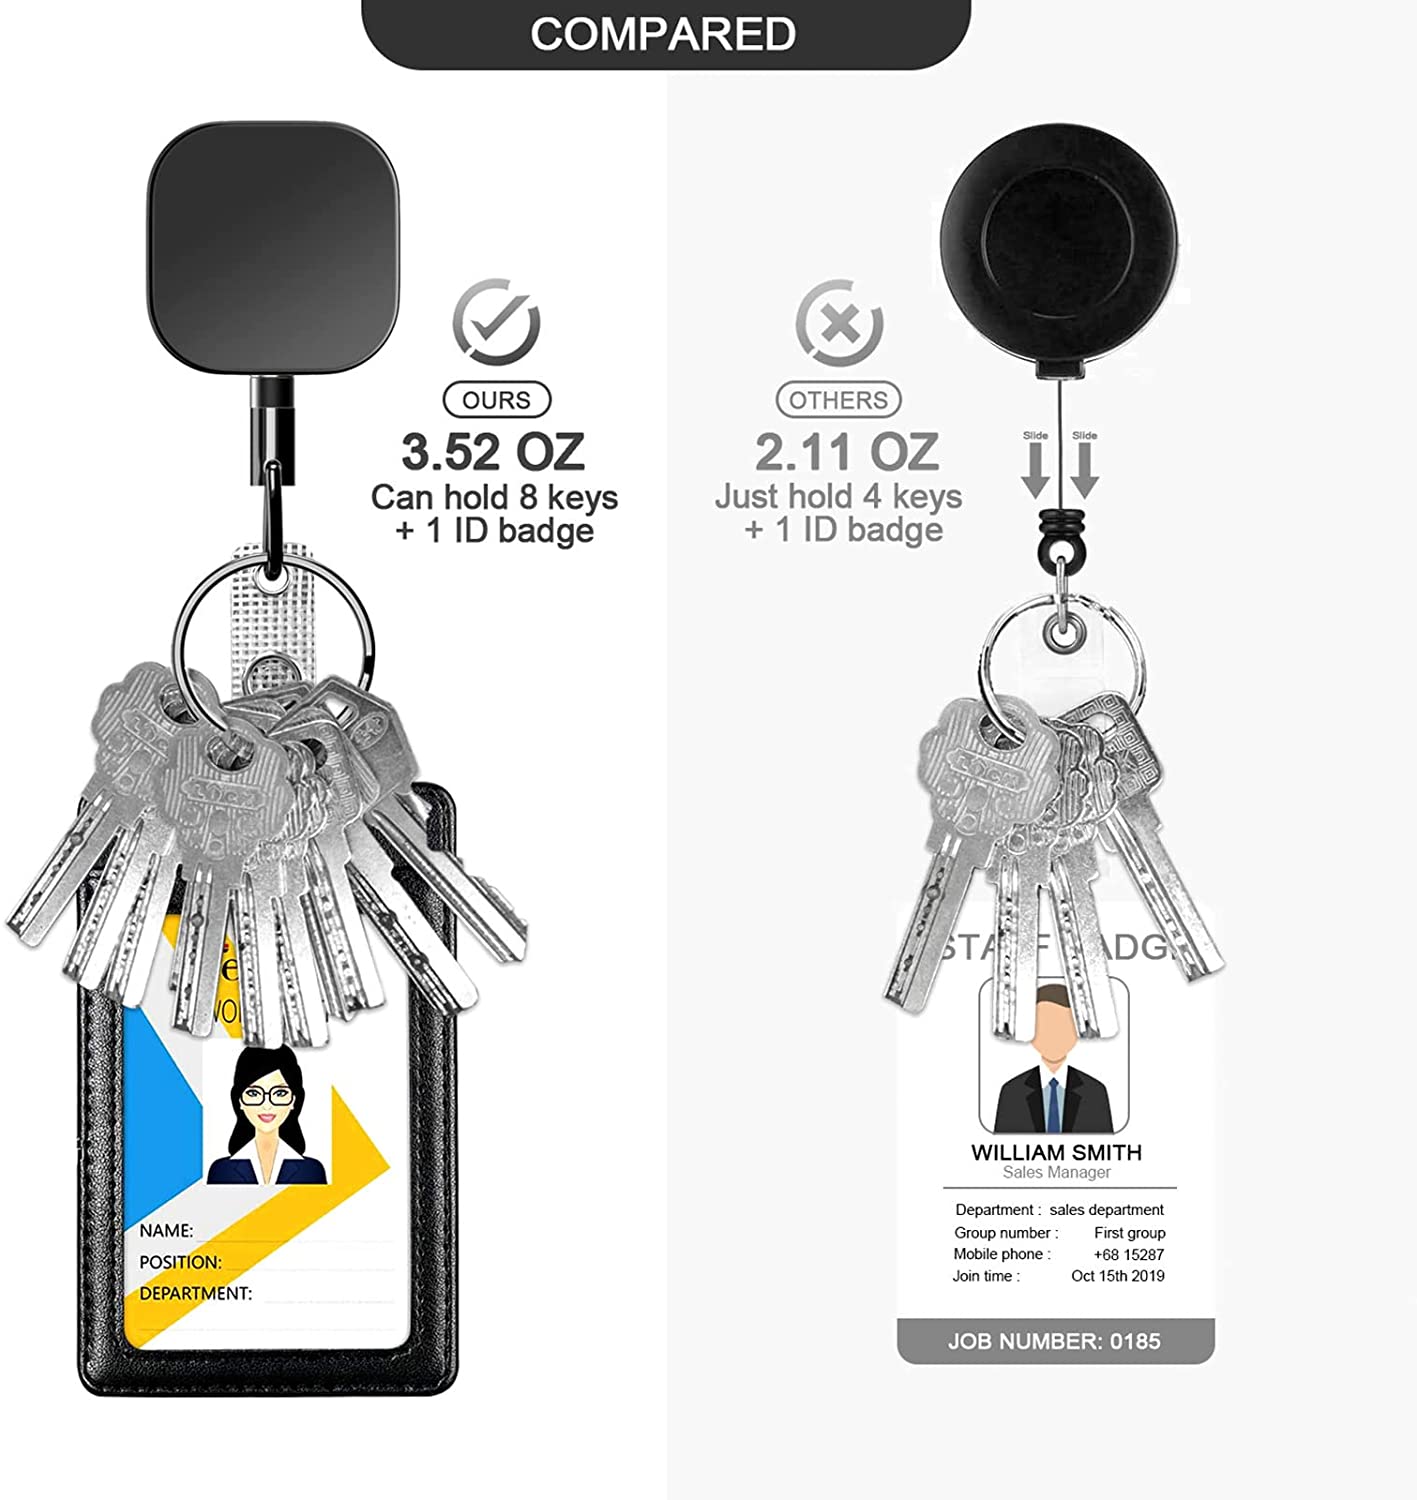 Retractable Badge Holder Key Reel, 2 Pack Heavy Duty Metal ID Badge Holder  with Belt Clip Key Ring for Name Card Keychain